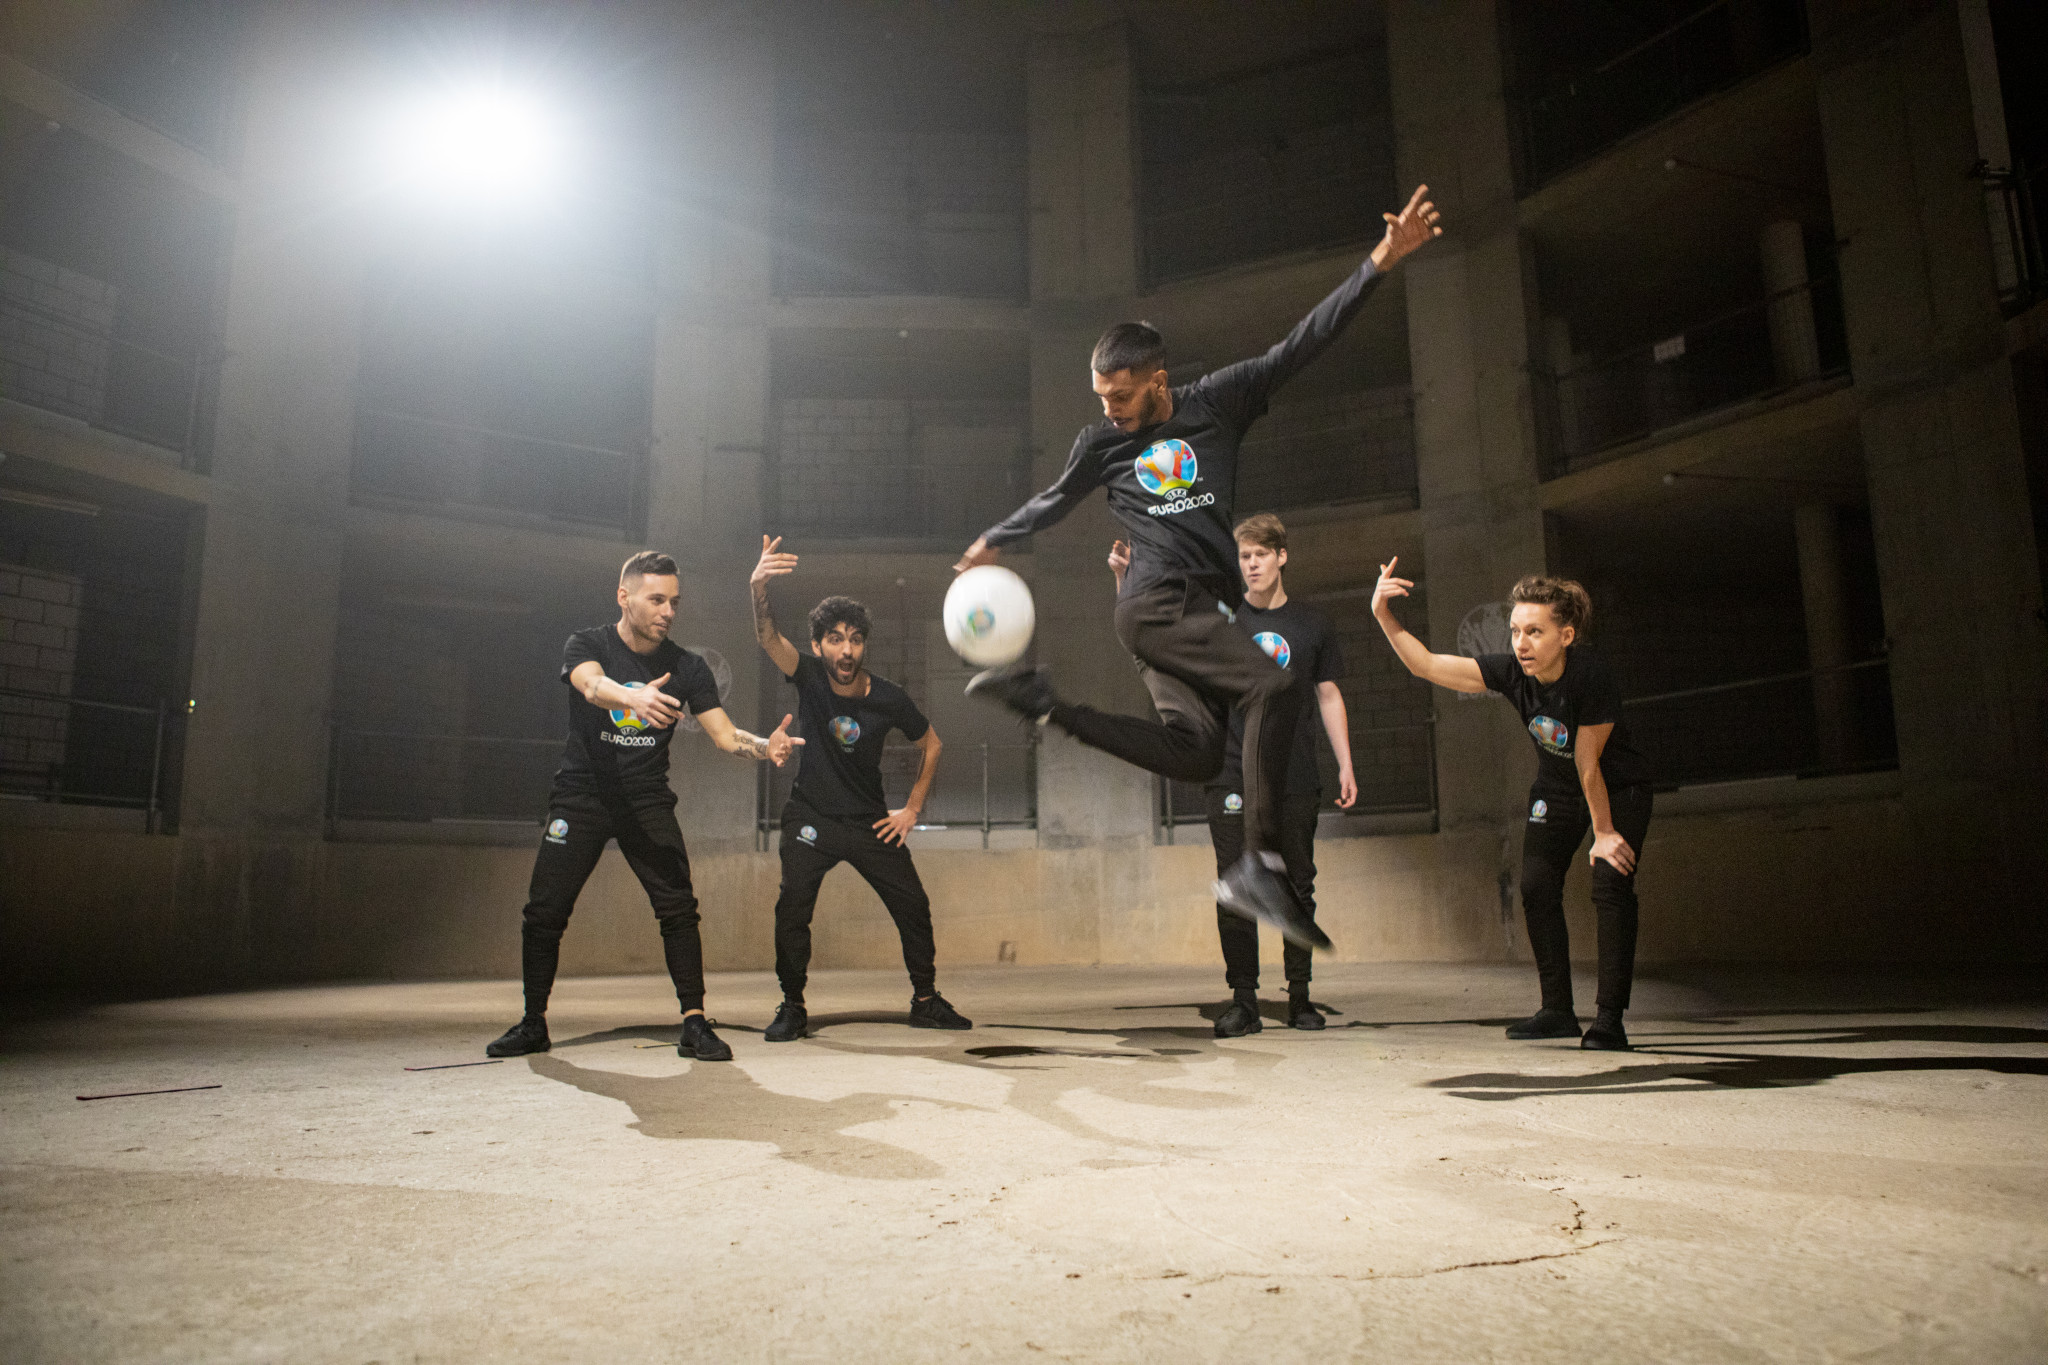 The video features several freestyle footballers performing their best tricks in a derelict building ©UEFA